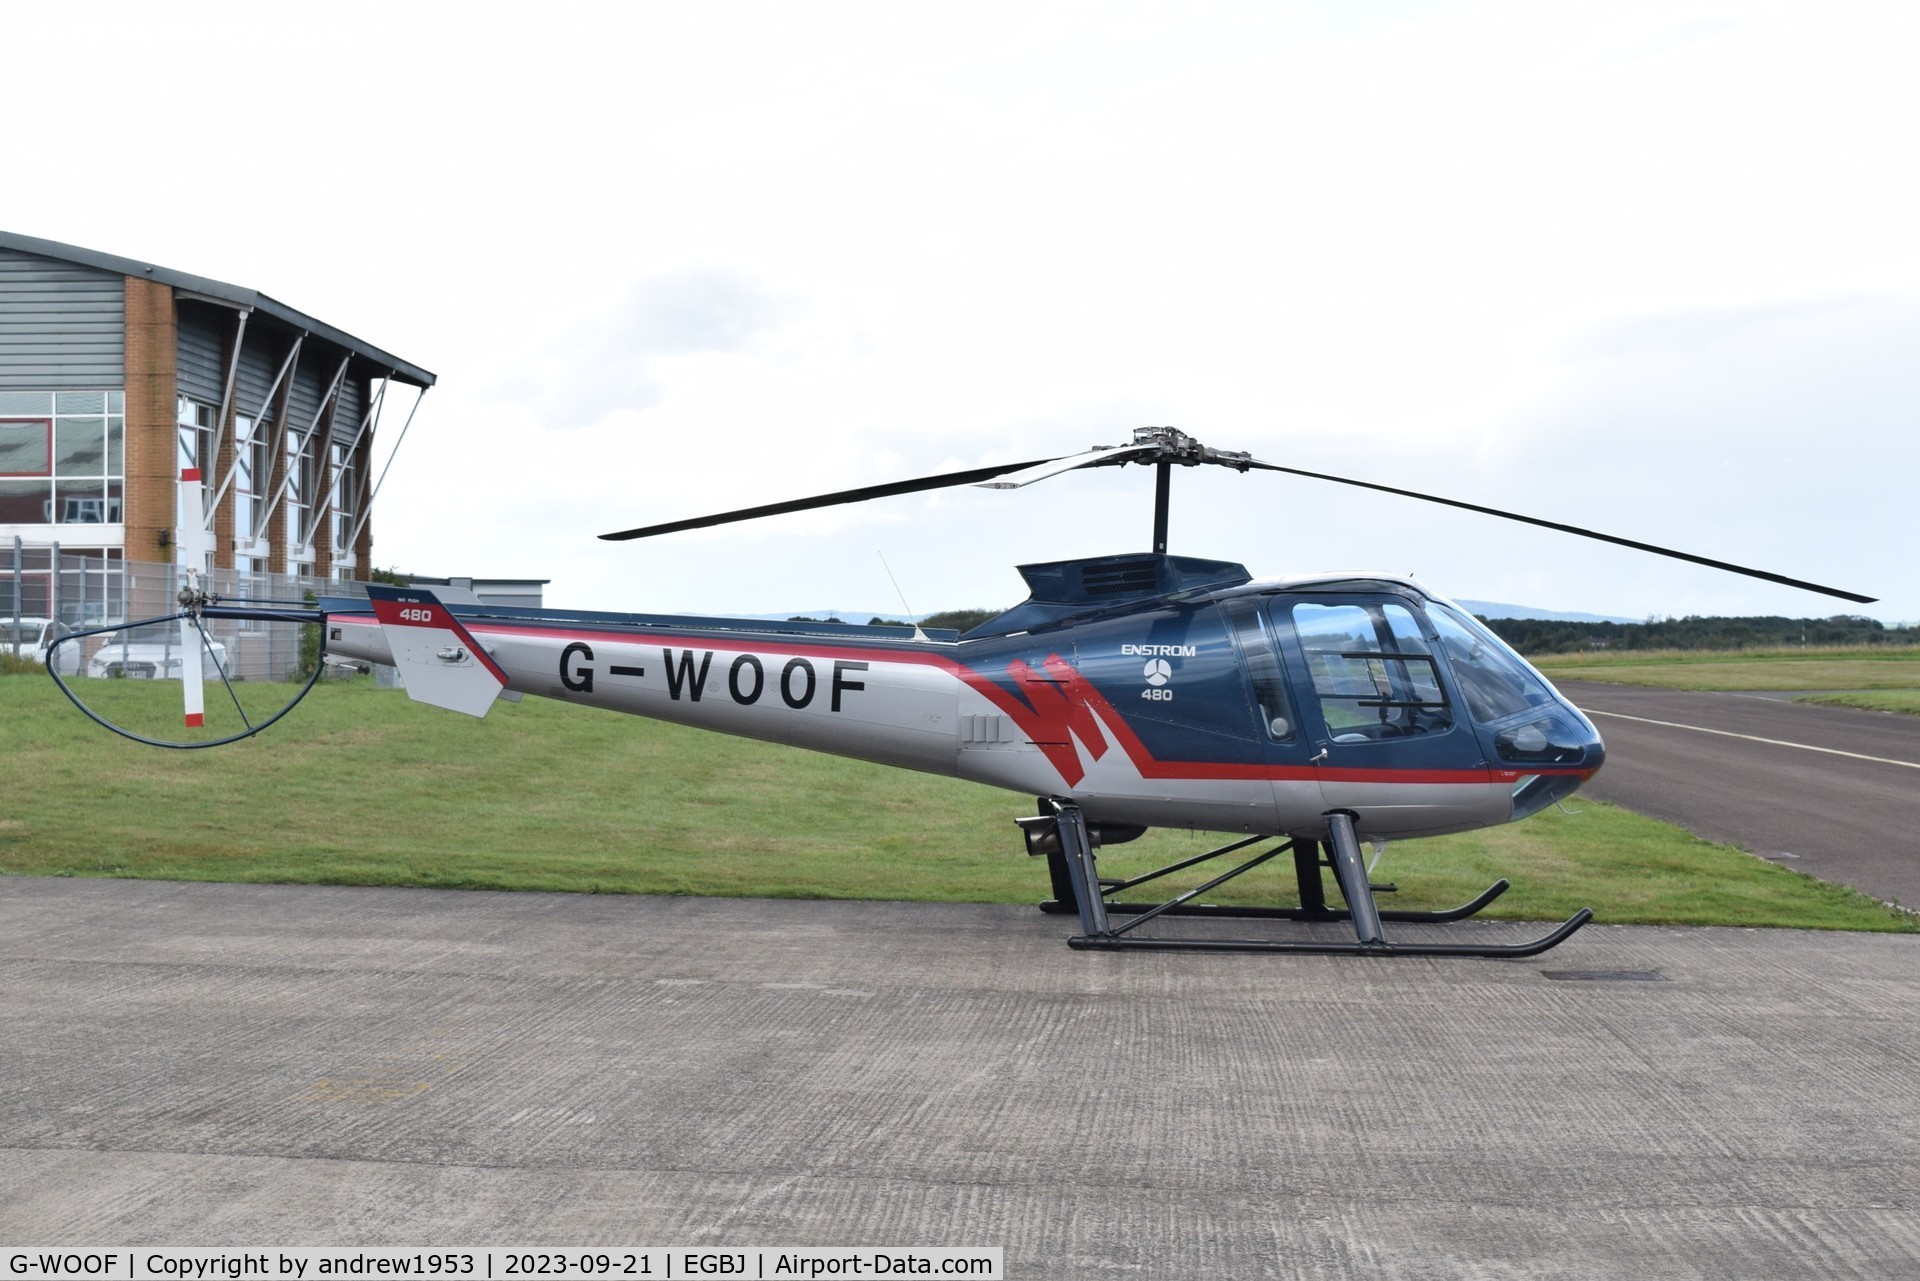 G-WOOF, 1998 Enstrom 480 C/N 5027, G-WOOF at Gloucestershire Airport.